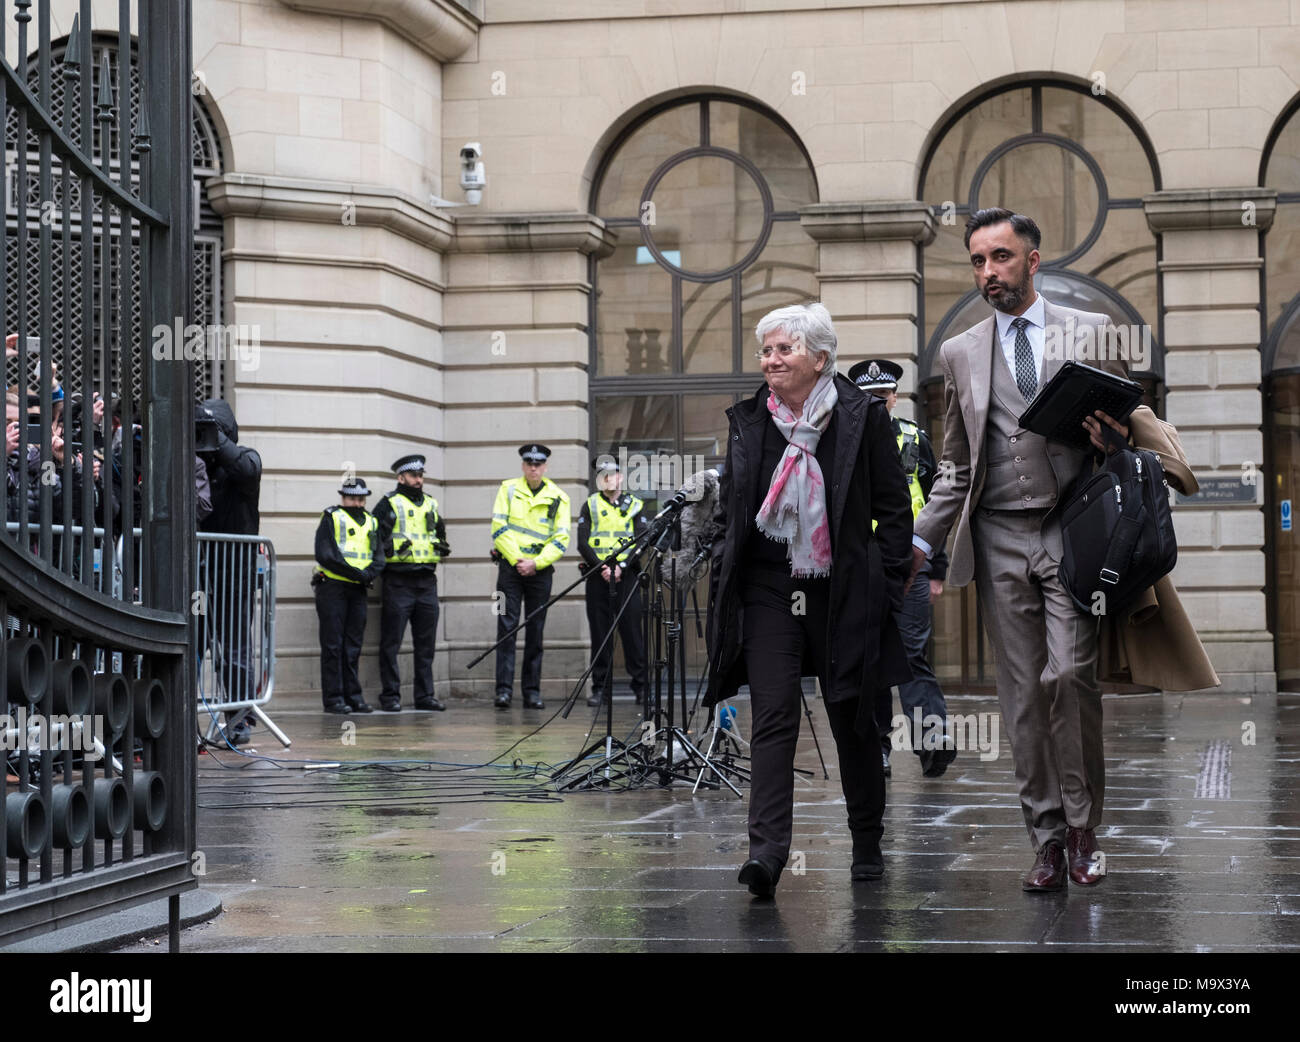 Edinburgh, Scotland,UK. 28 March 2018.  former Catalonia Education Minister and independence supporter Clara Ponsati leaves Edinburgh Sheriff Court after her bail hearing. Ponsati faces extradition to Spain. She was granted bail. Credit: Iain Masterton/Alamy Live News Stock Photo